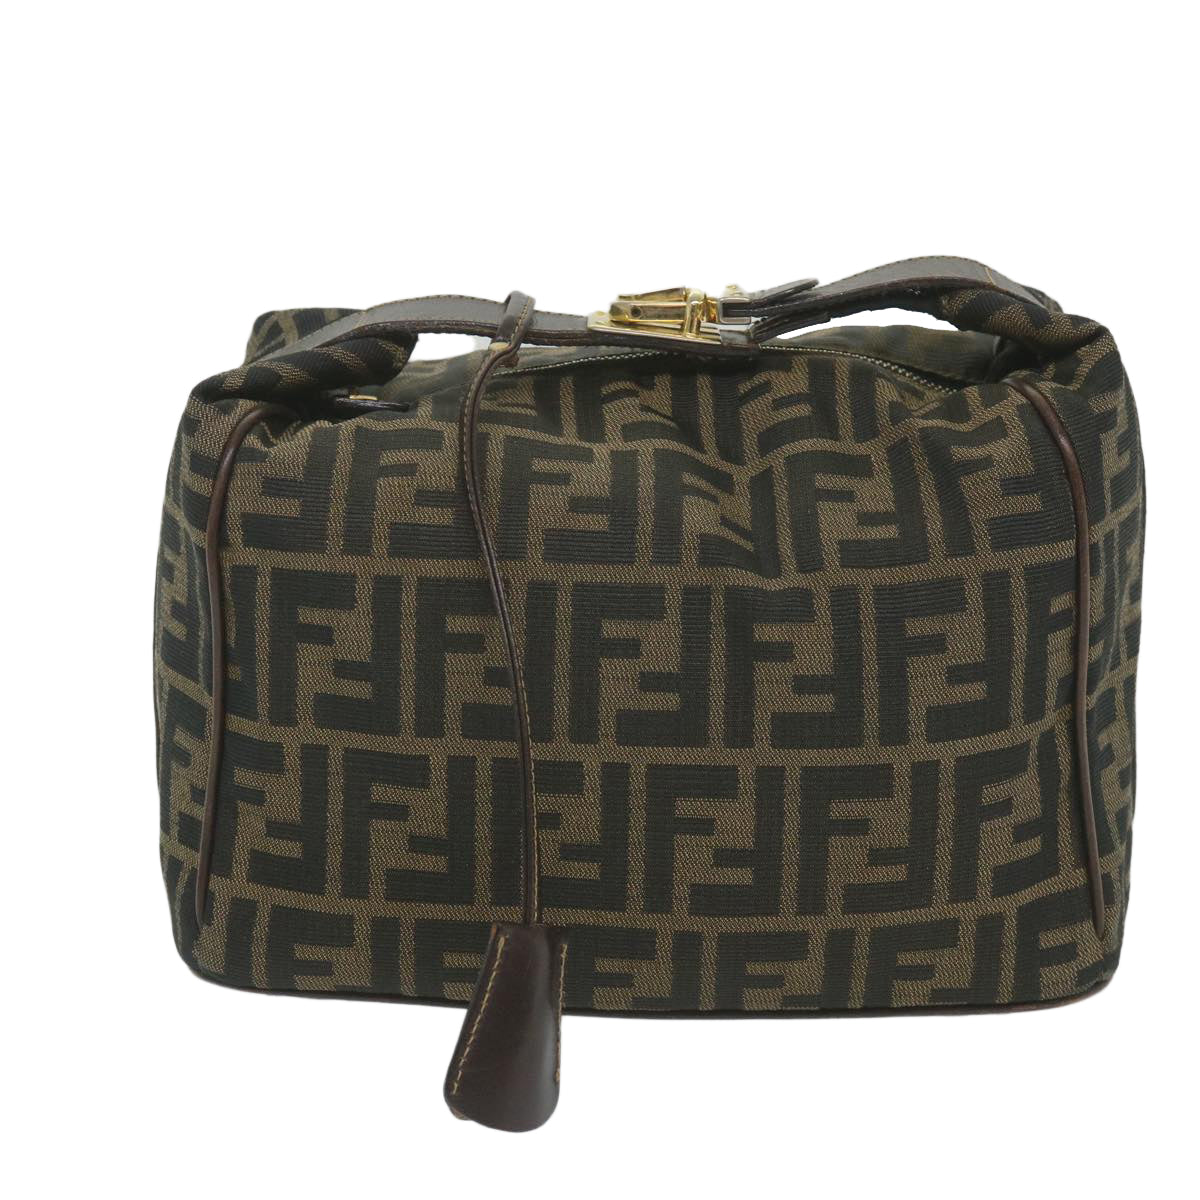 FENDI Zucca Canvas Vanity Cosmetic Pouch Black Brown Auth 59689